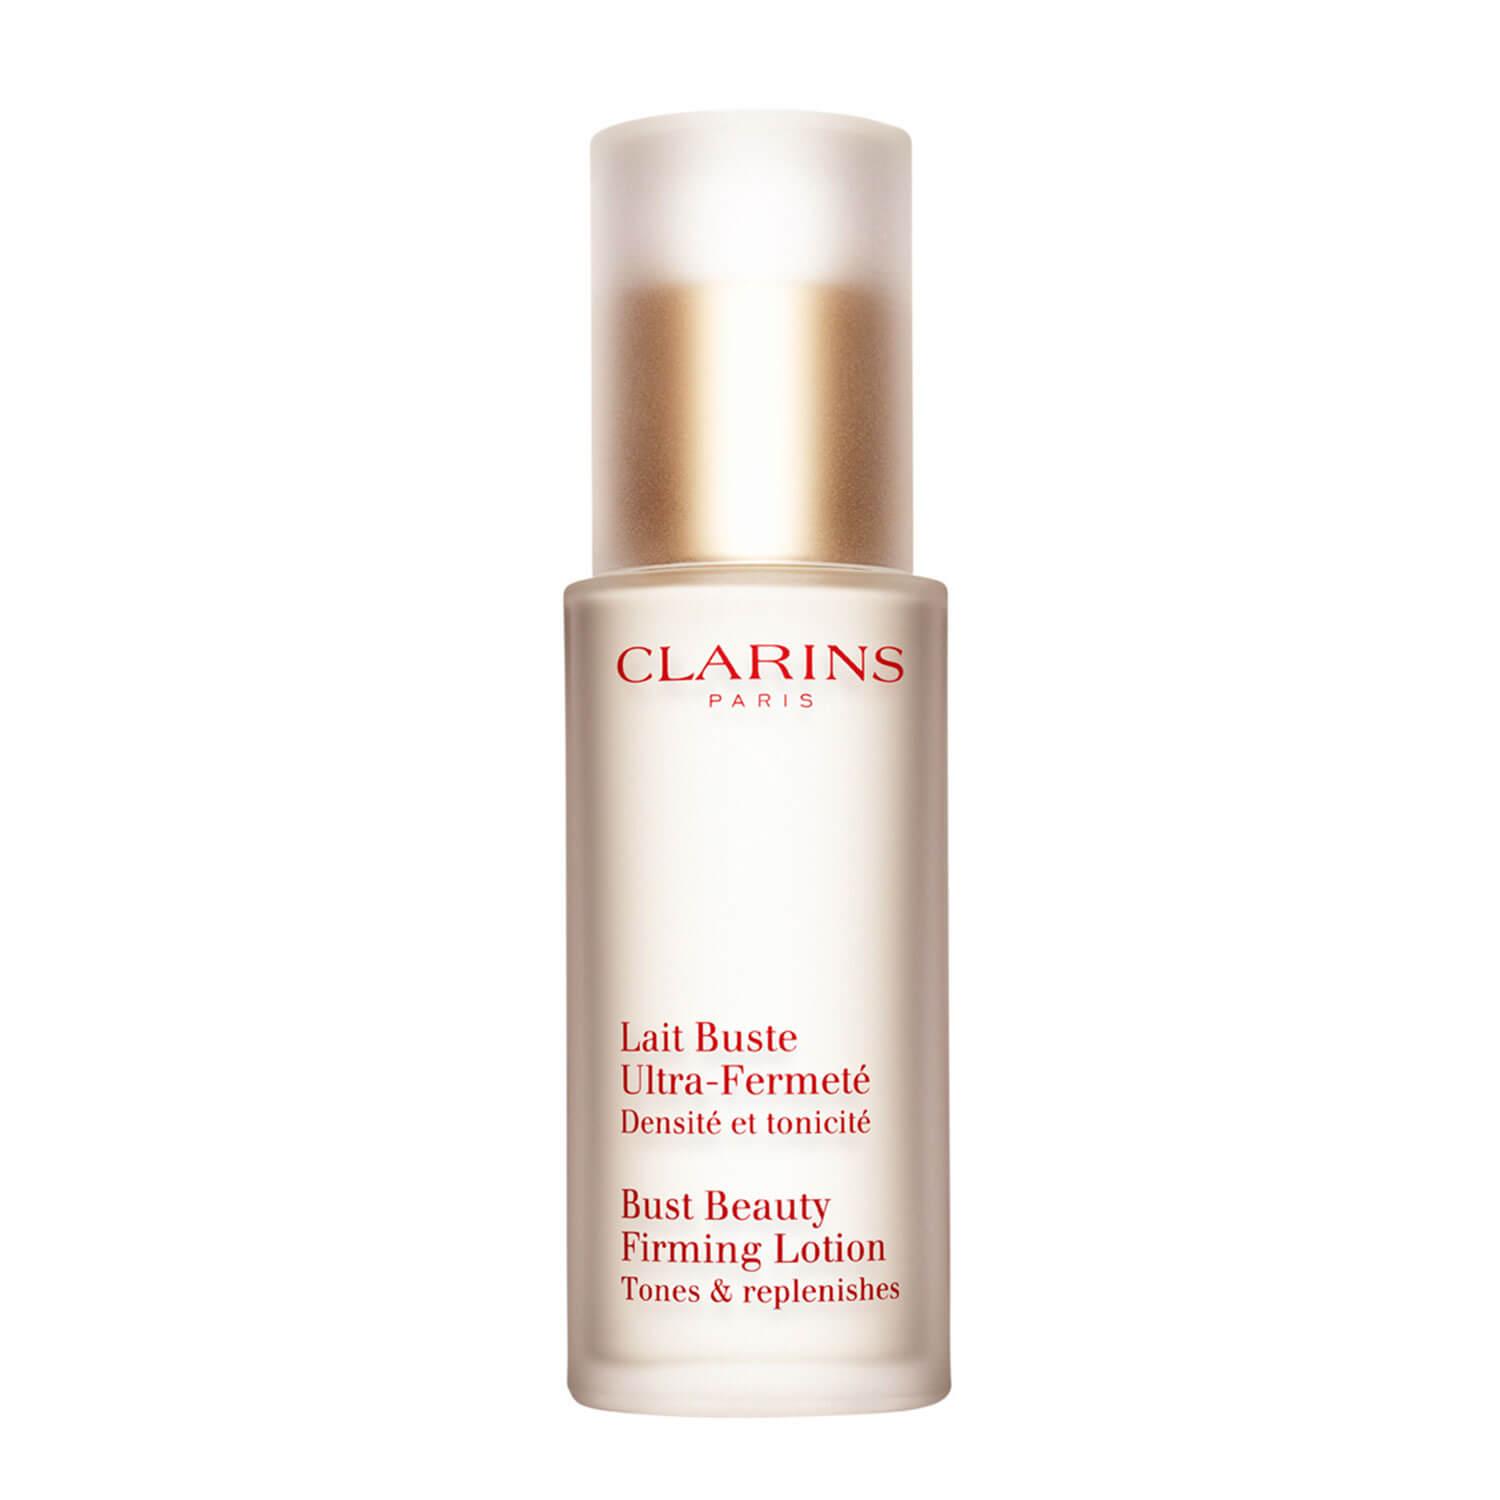 Clarins Body - Bust Beauty Firming Lotion